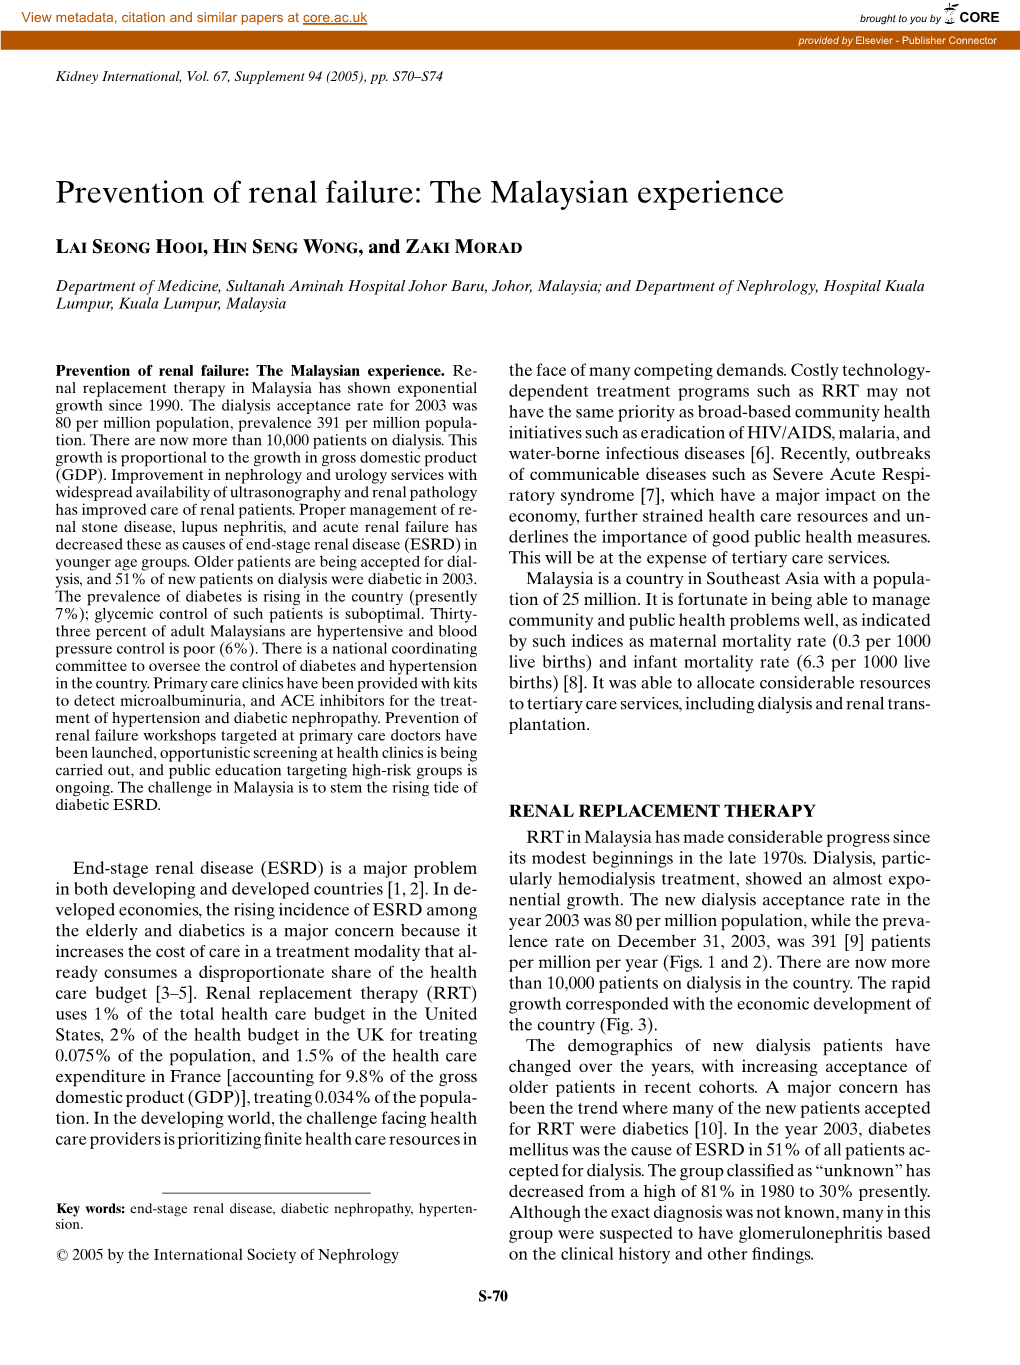 Prevention of Renal Failure: the Malaysian Experience